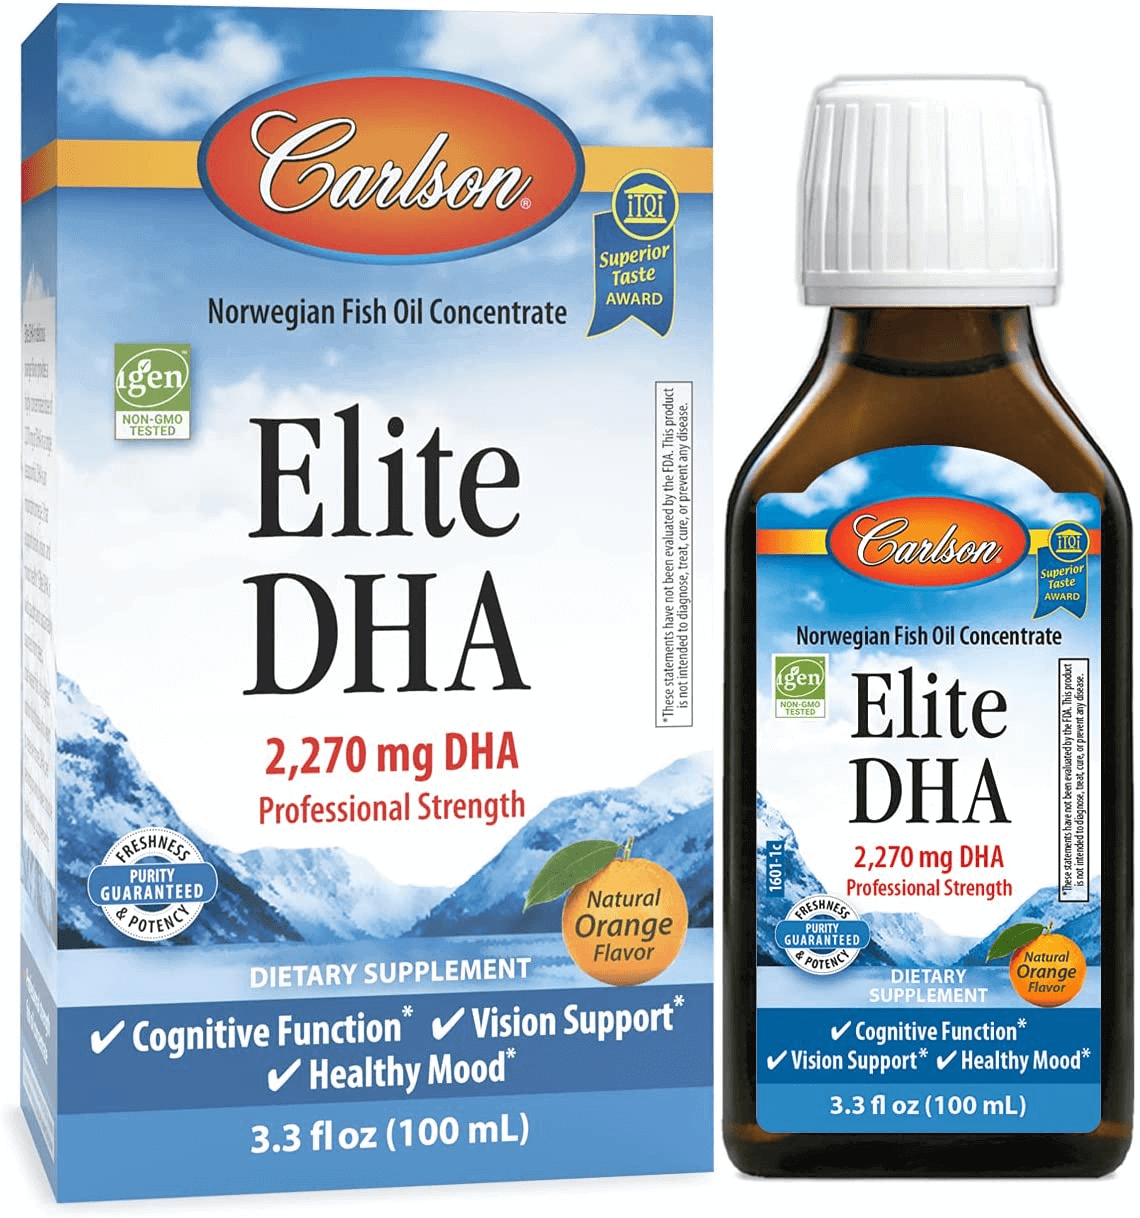 Carlson - Elite DHA, 2270 Mg DHA, Professional Strength, Norwegian Fish Oil Concentrate, Cognitive Function & Vision Support, Orange, 100 Ml - vitamenstore.com